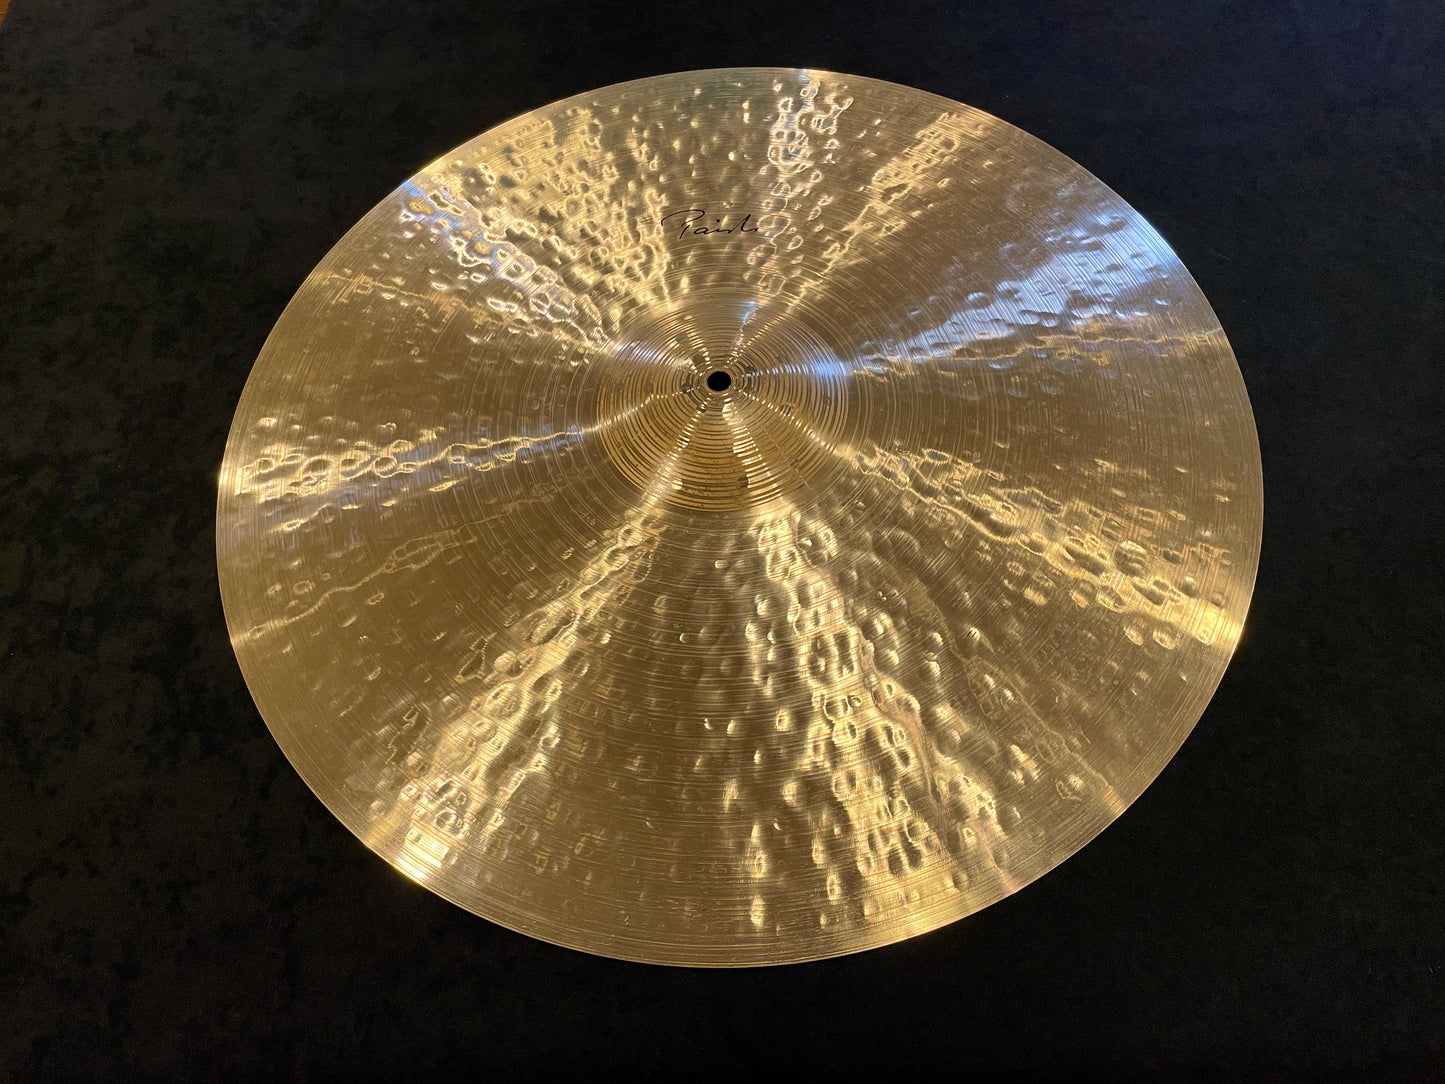 22" Paiste Signature Traditionals Light Ride Cymbal 2550g